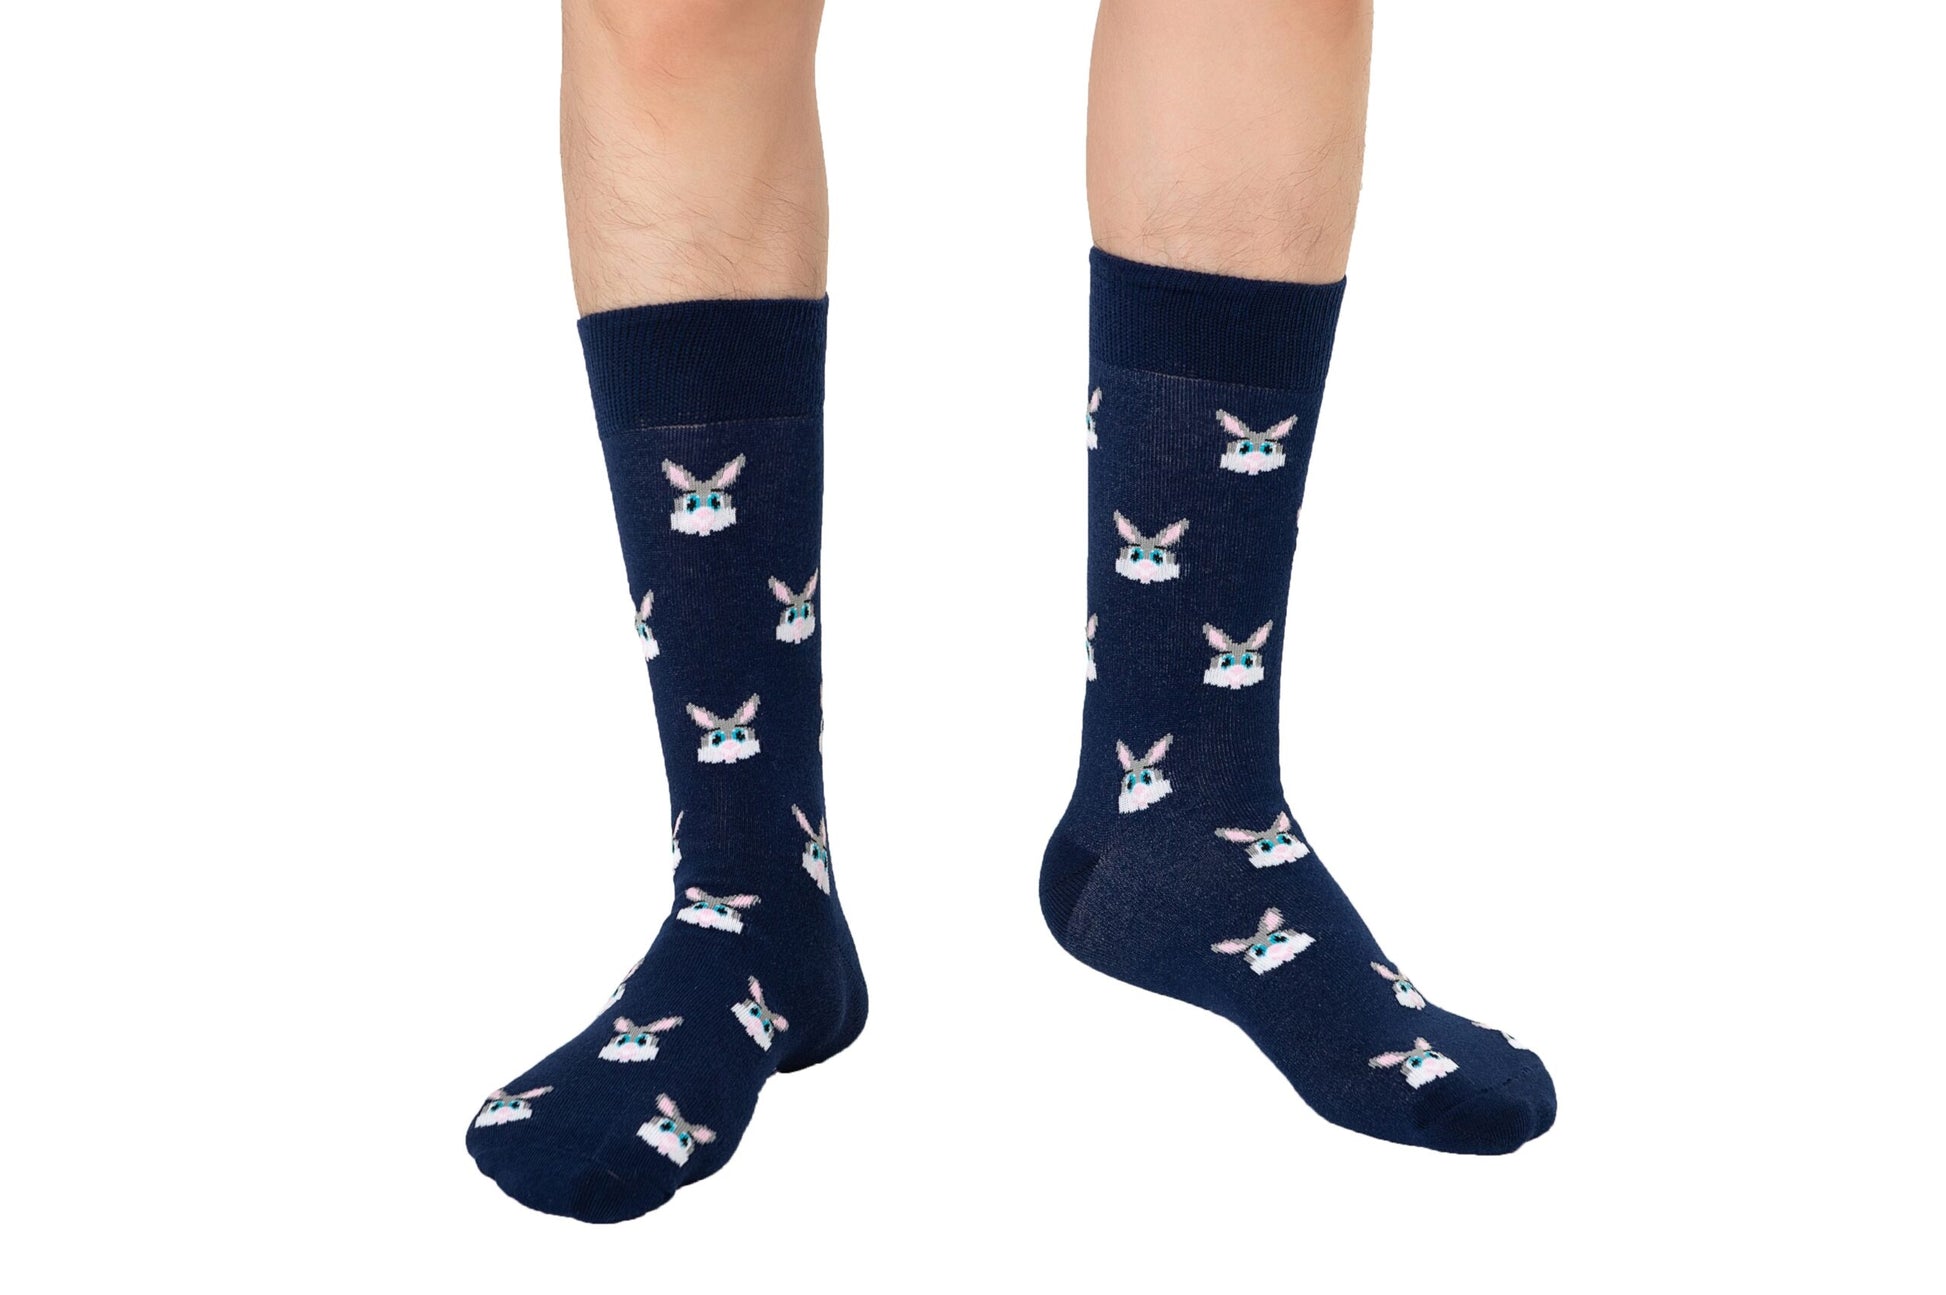 A pair of legs with Bunny Socks.